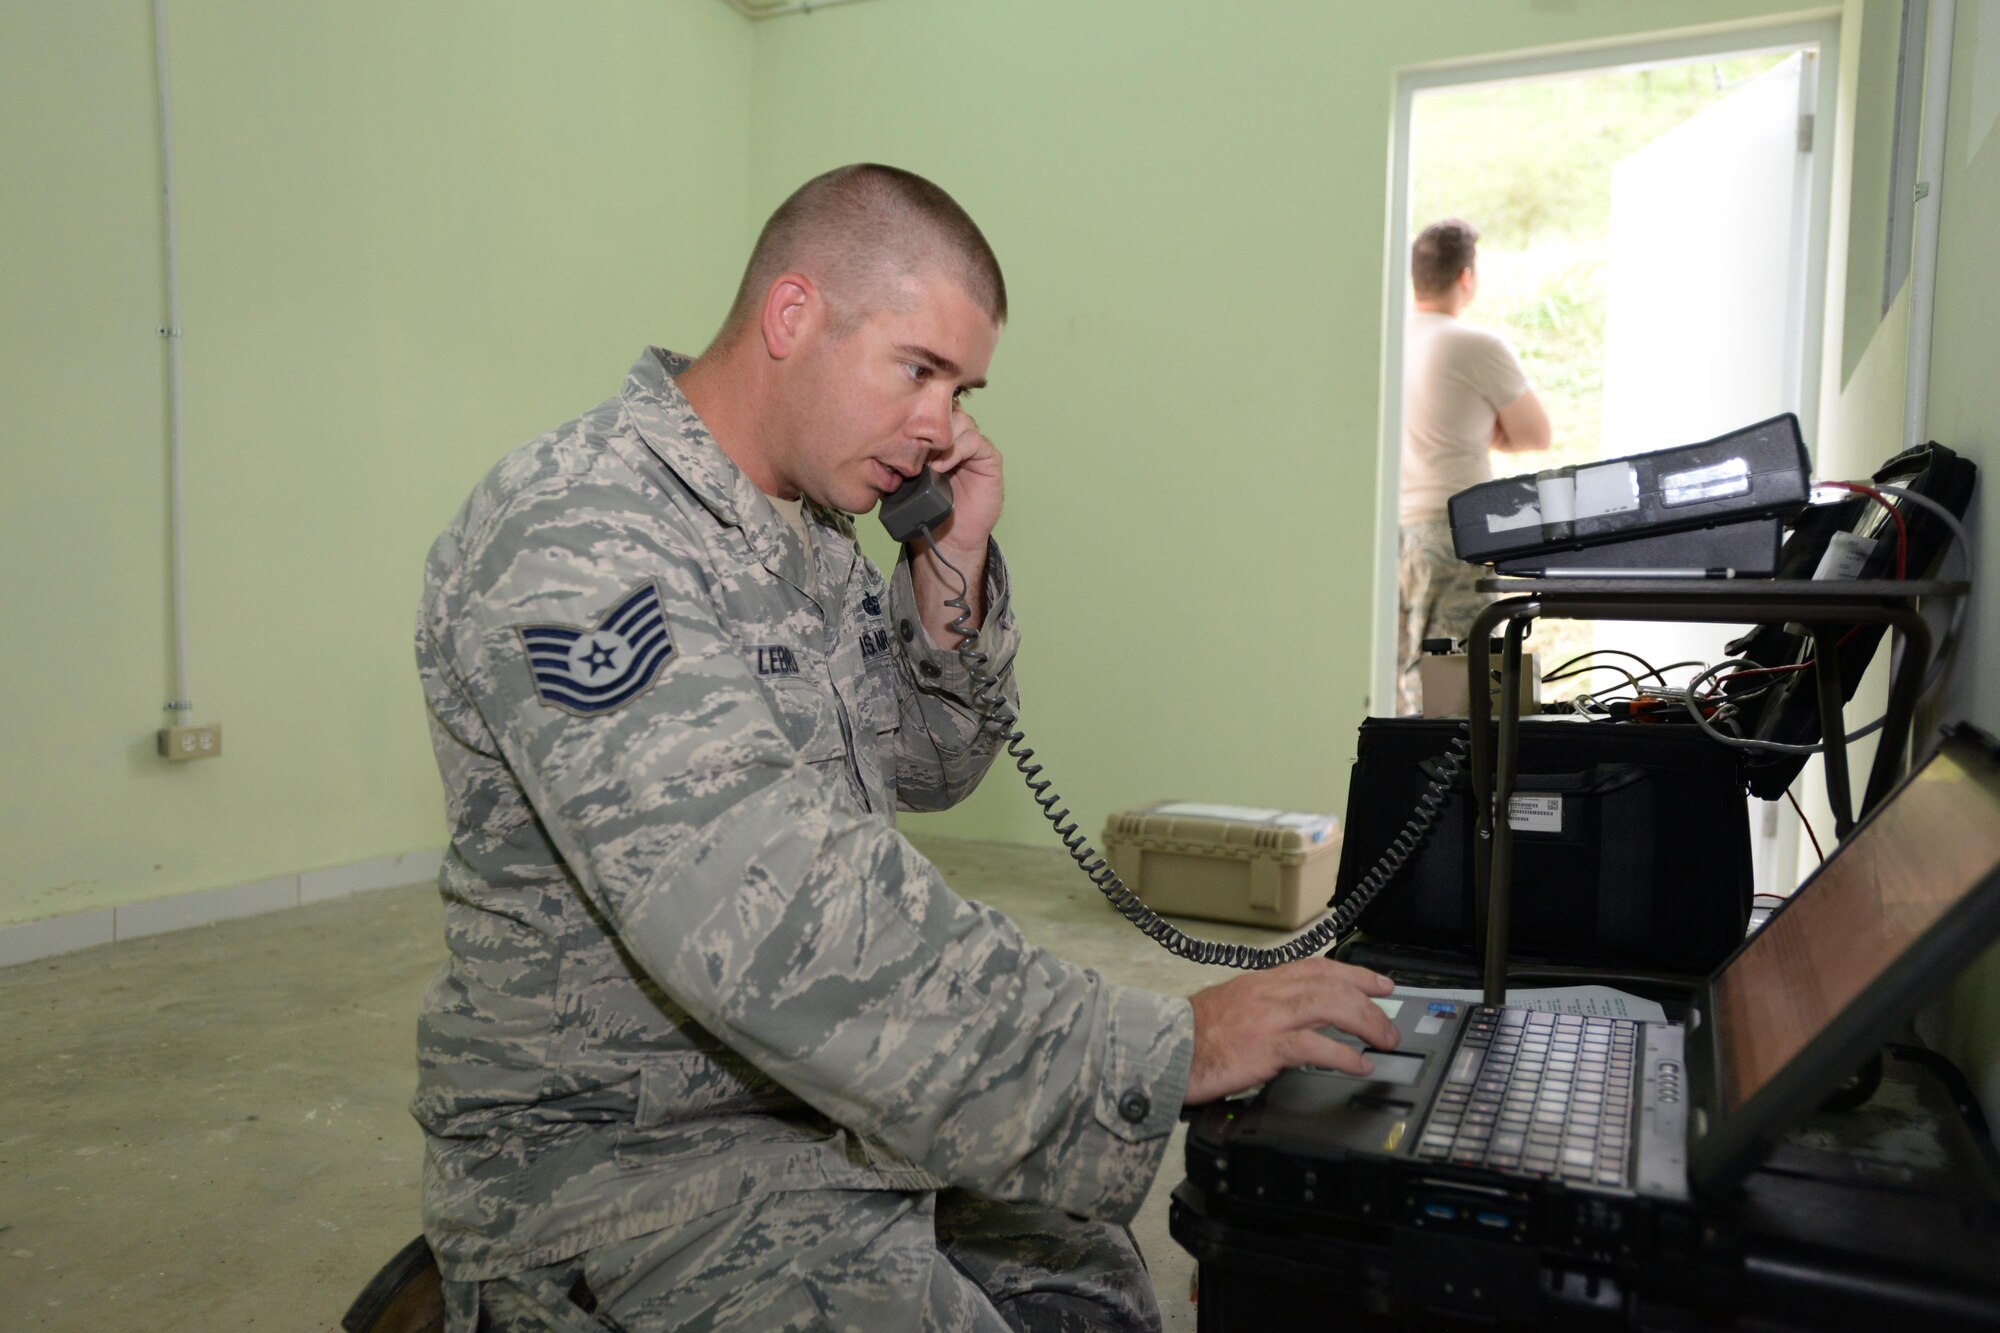 U.S. Air Force Tech. Sgt. Philippe LeBrun, the 51st Combat Communications Squadron (CCS) radio frequency transmission systems noncommissioned officer in charge, out of Robins Air Force Base, Ga., works on a computer in support of NEW HORIZONS 2017 in Arroyo Cano, Dominican Republic, April 24, 2017. Airmen with the 51st CCS train to provide the initial communications for a bare base setup such as the one used by U.S. service members during NH17. (U.S. Air Force photo by Staff Sgt. Timothy M. Young)